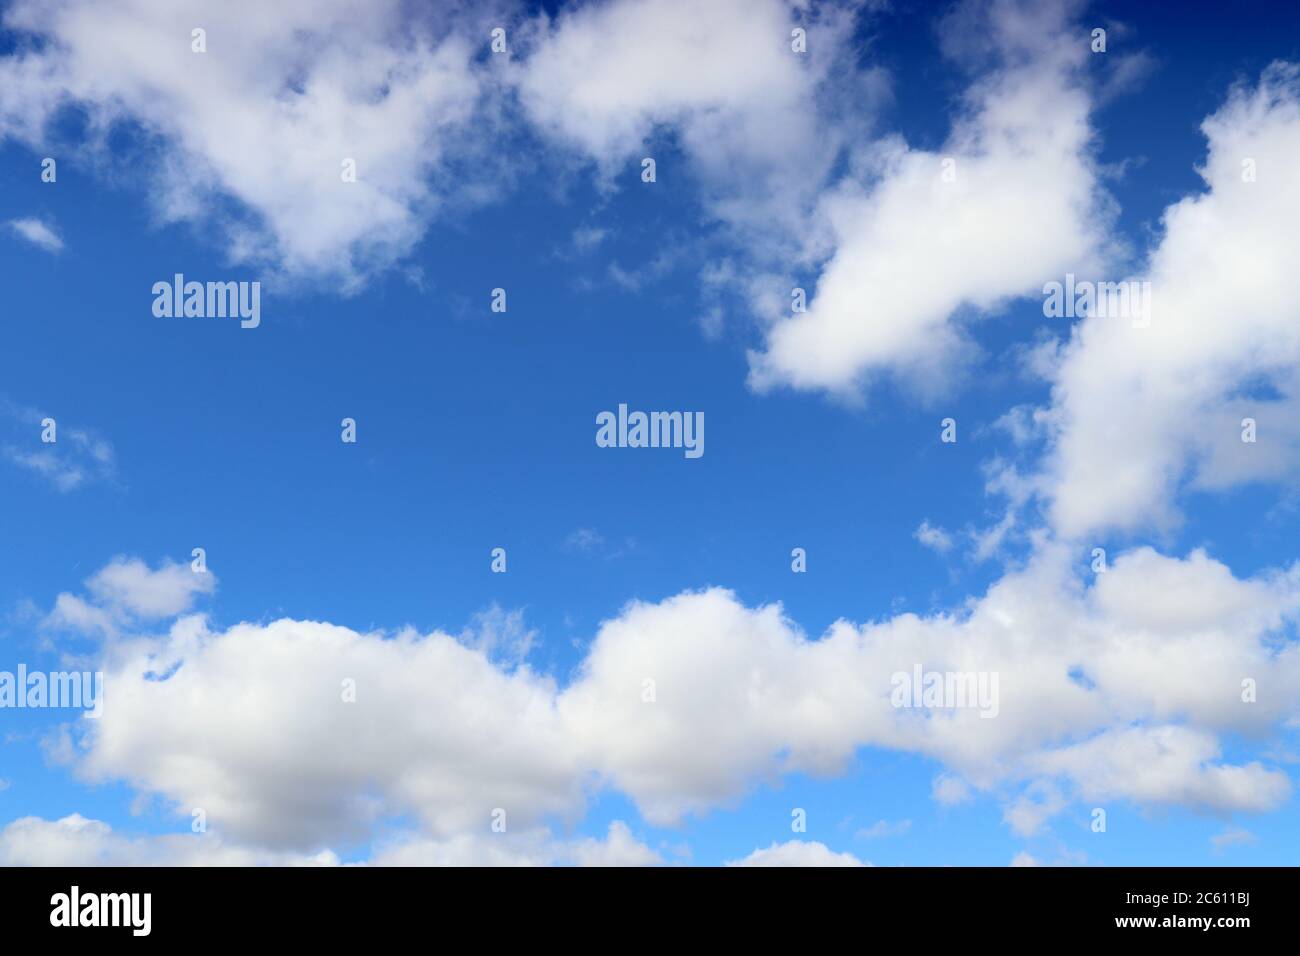 White clouds blue sky background. White fluffly clouds texture. Stock Photo